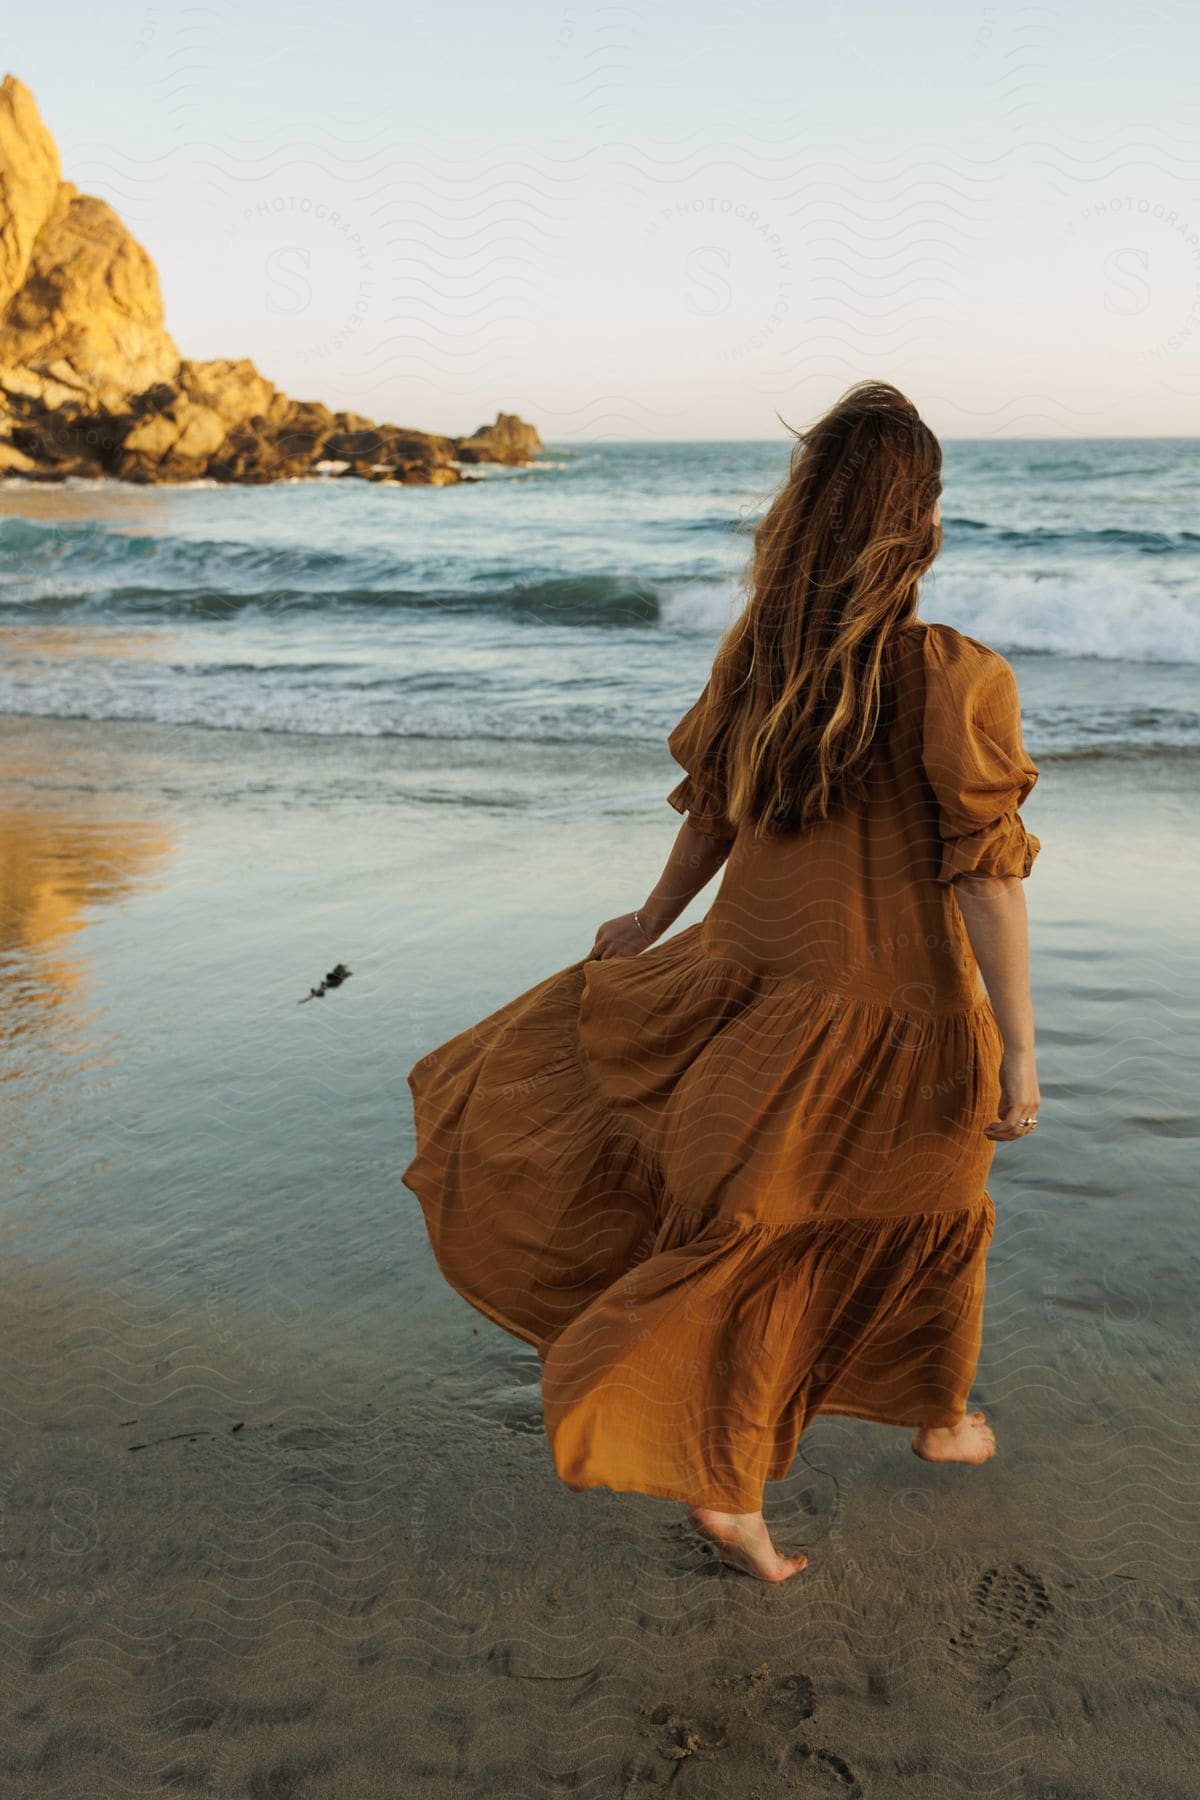 A barefoot woman in flowing brown dress on a sandy beach.